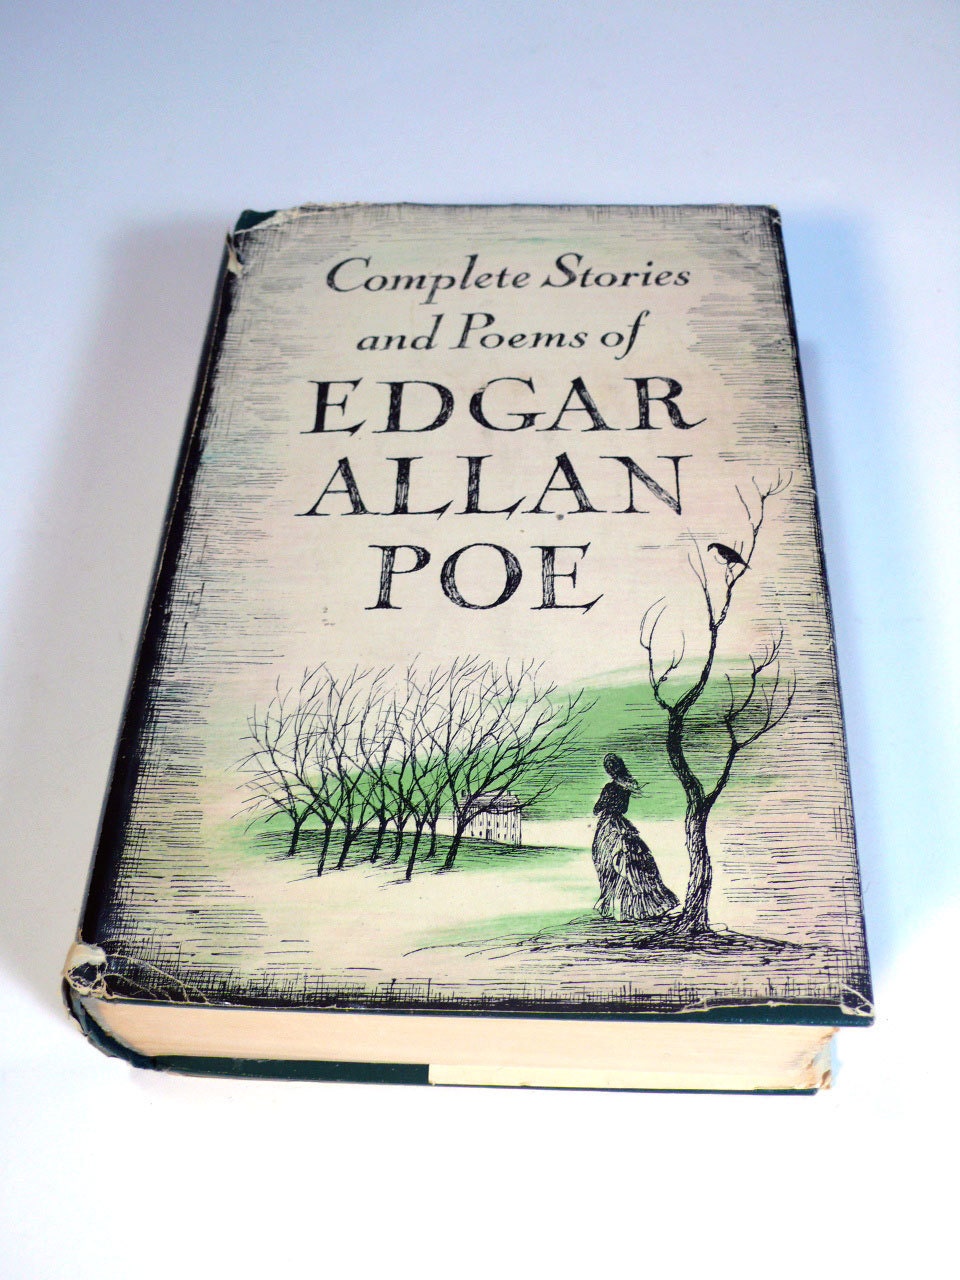 for the mystery man, vintage 1960's hardcover book complete stories and poems of EDGAR ALLAN POE - deckle edged paper - so classic